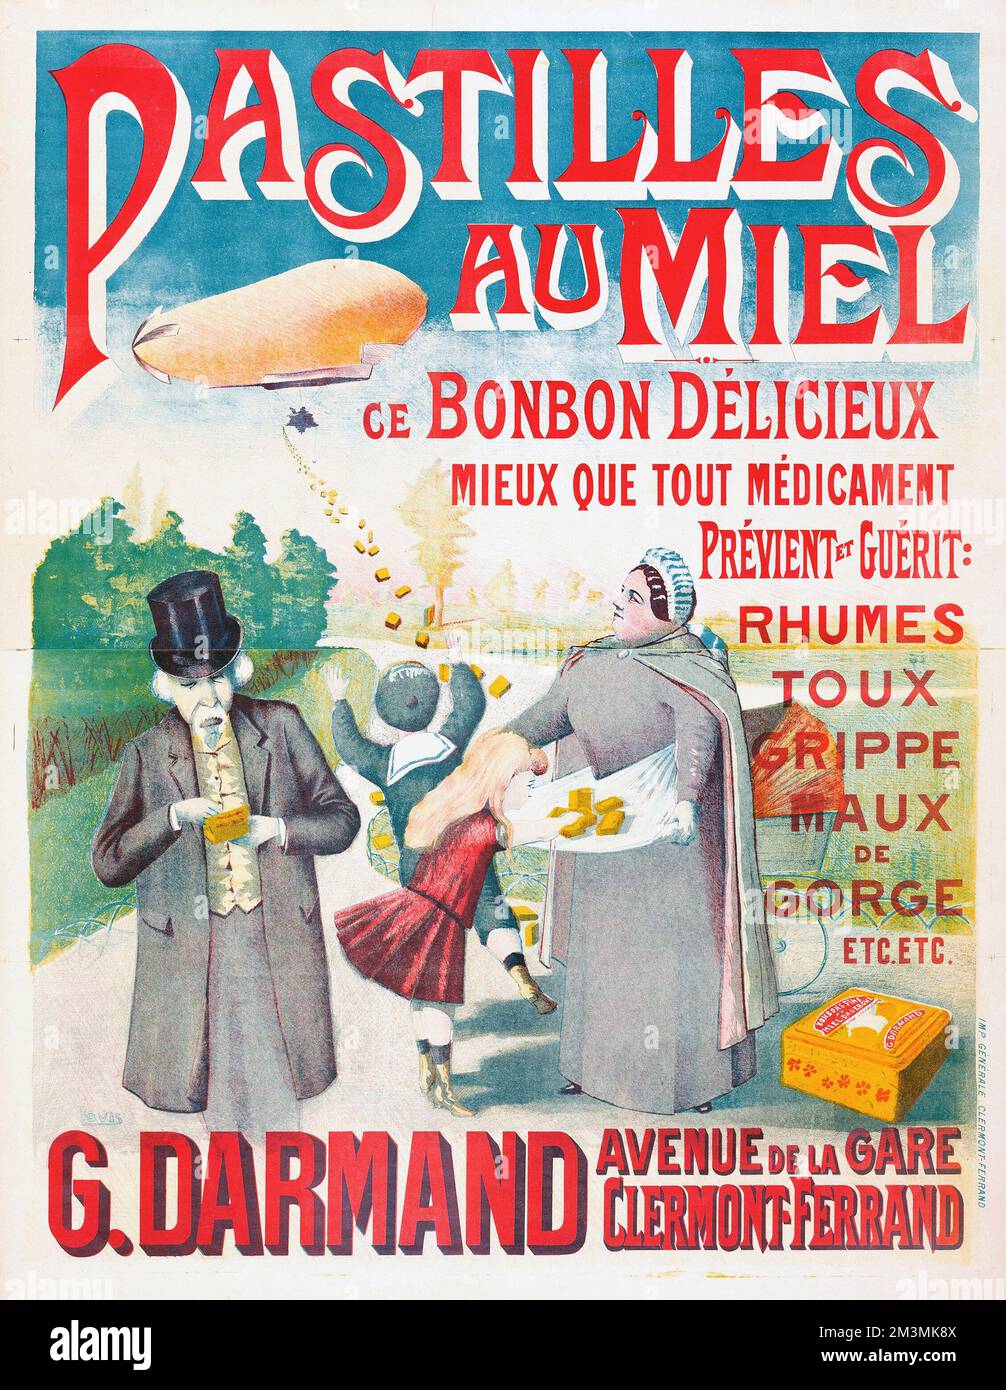 Pastilles Au Miel (Generale Clermont-Ferrand, 1920s). French Advertising Poster Stock Photo